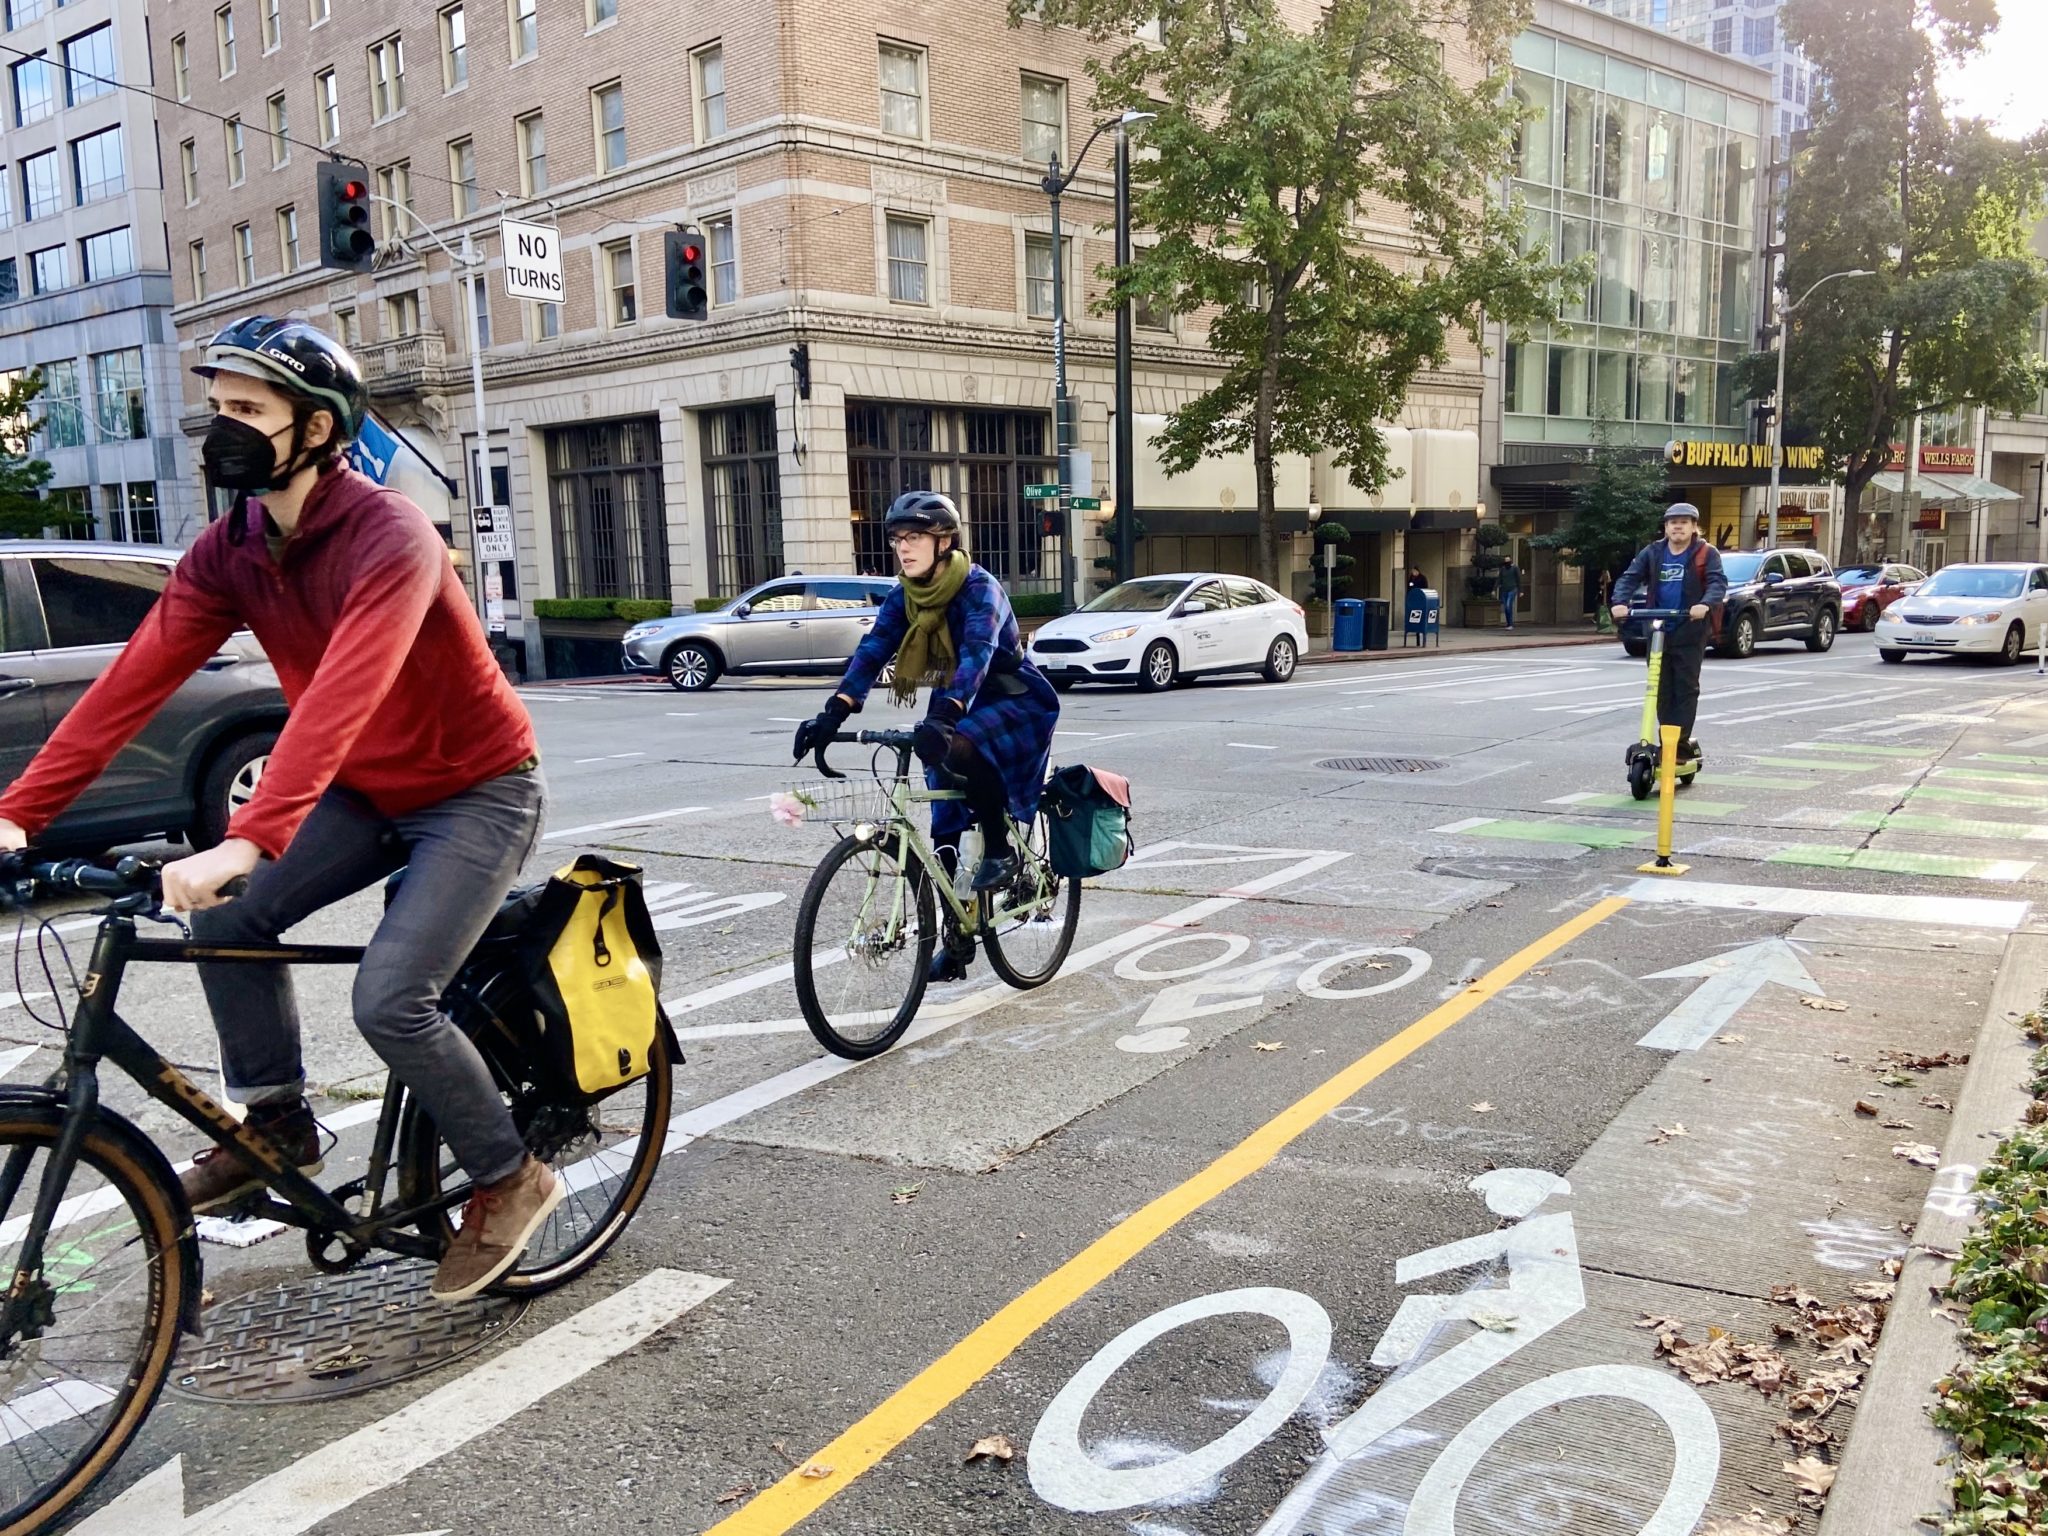 Two people ride bikes and one person rides a scooter in a protected bike lane through downtown Seattle.